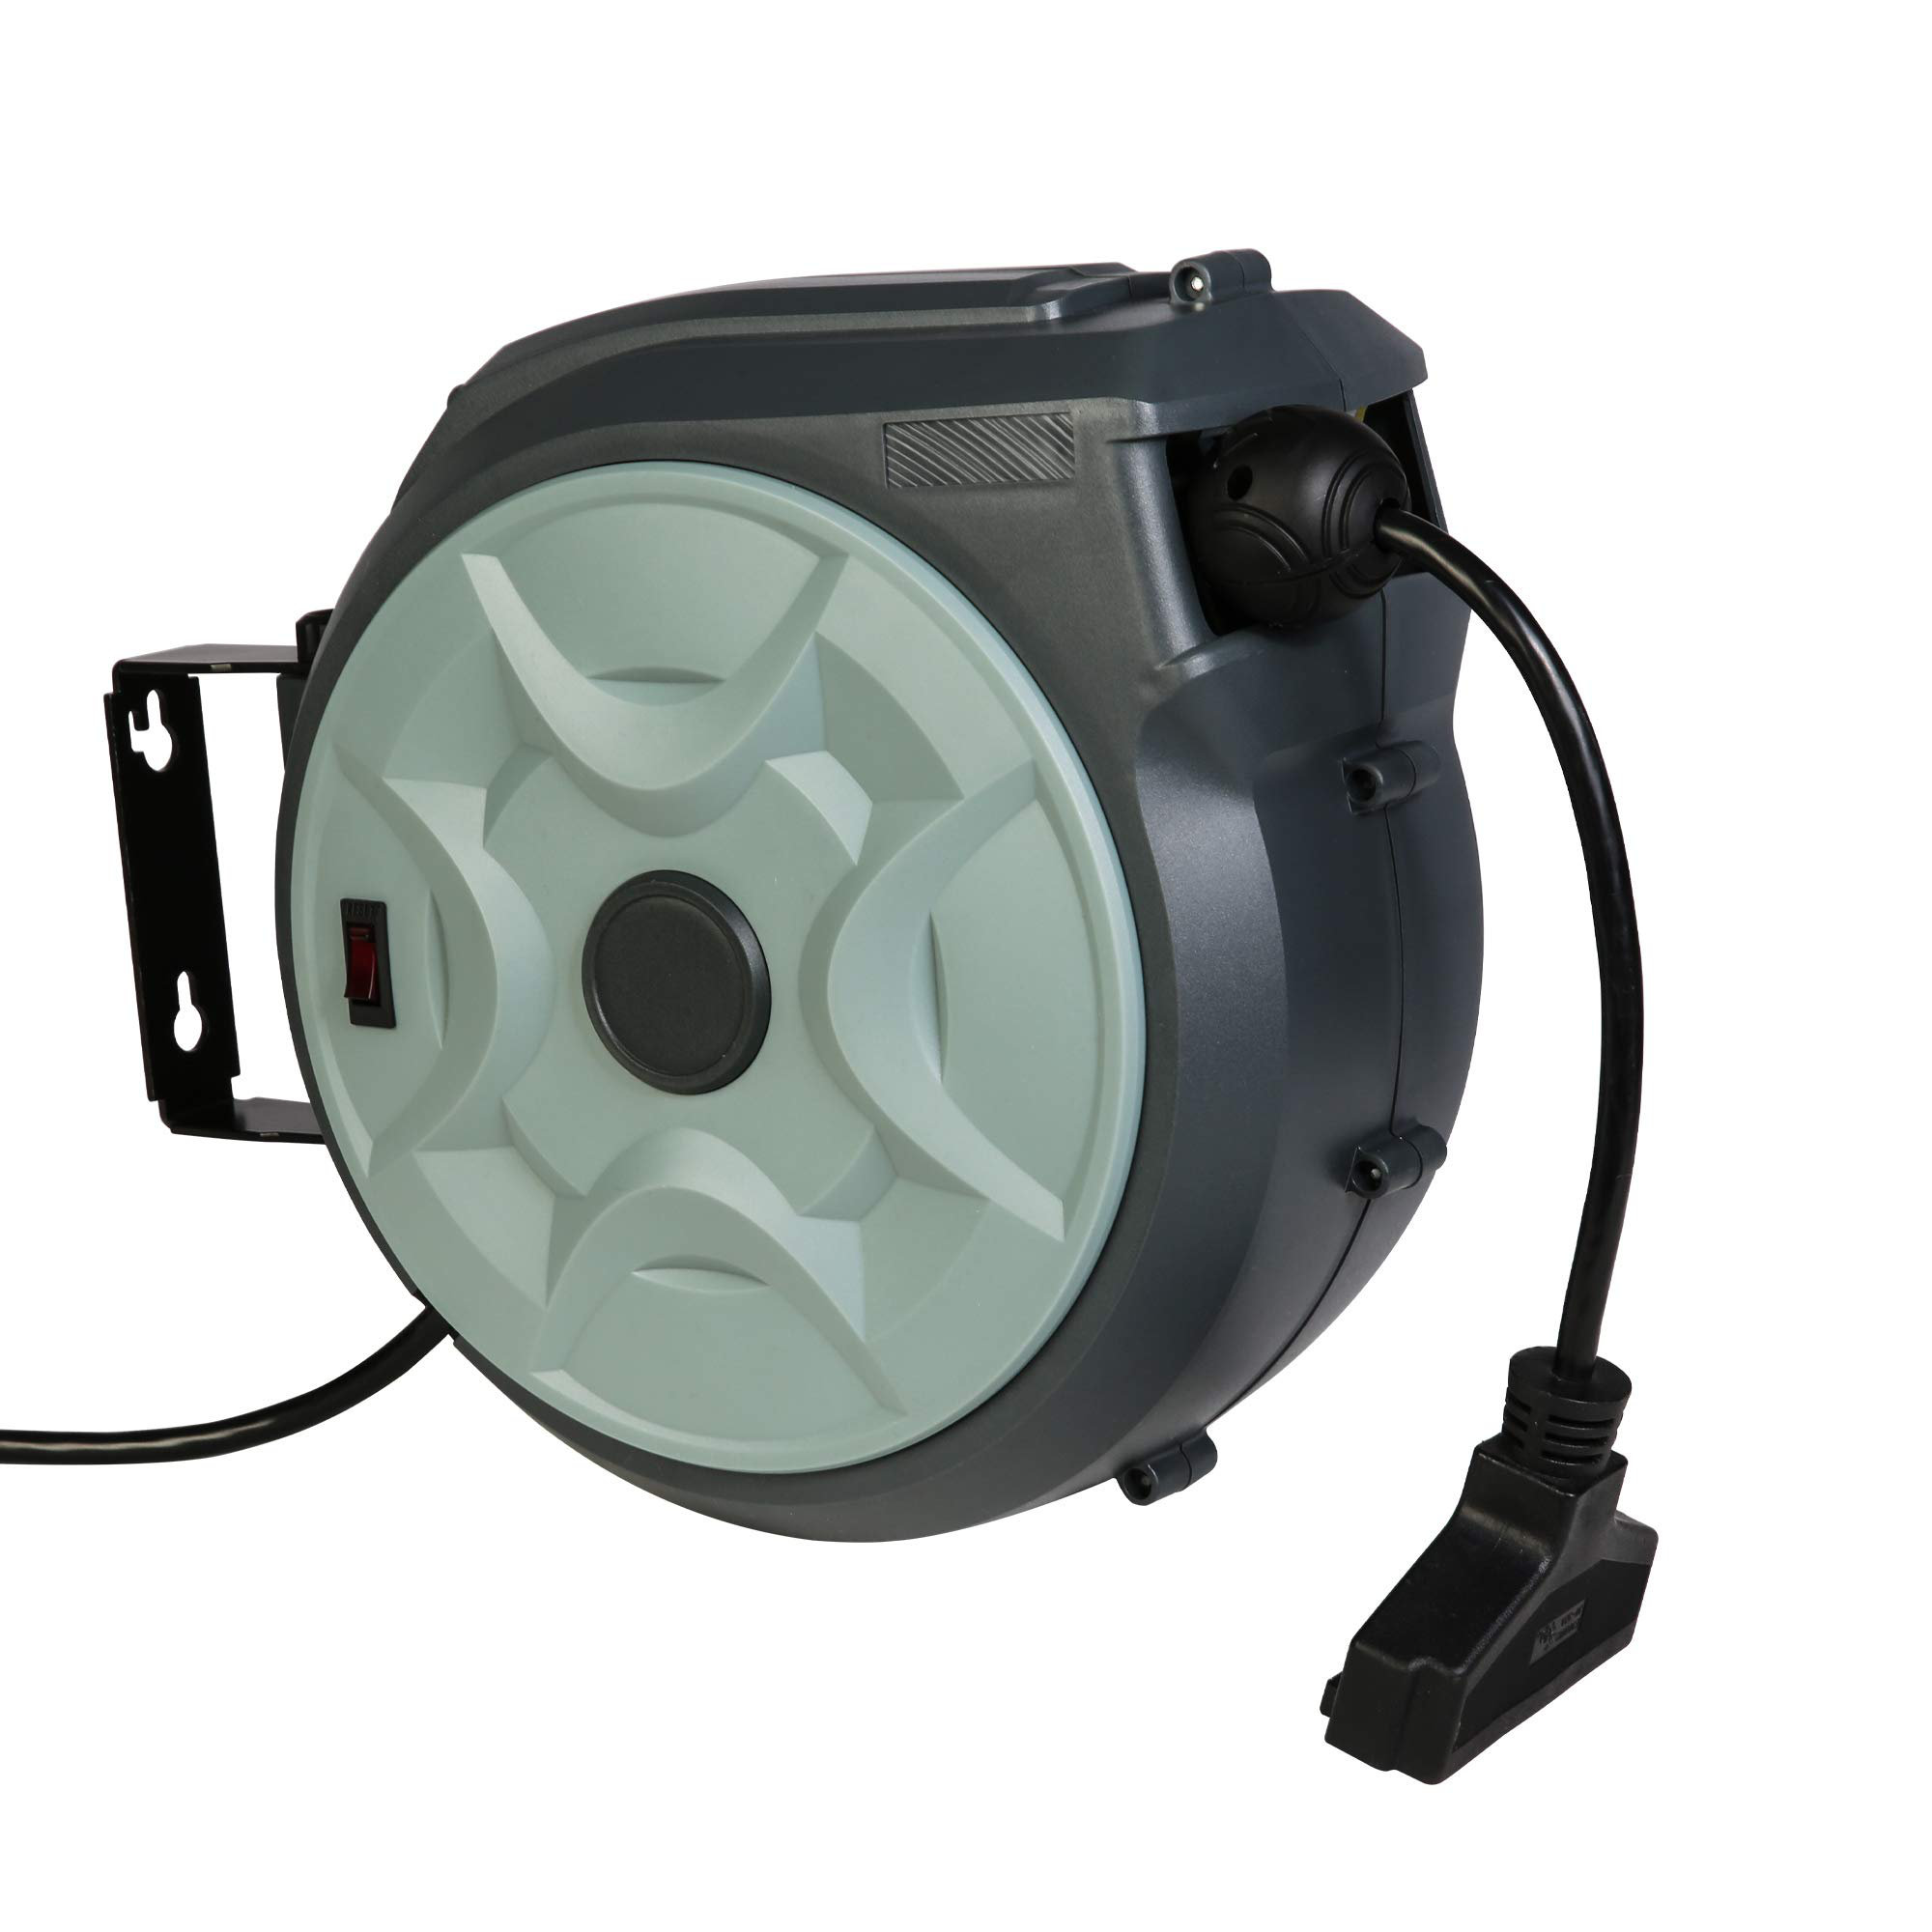 Wall Or Ceiling Mount Retractable Extension Cord Reel, 40ft Power